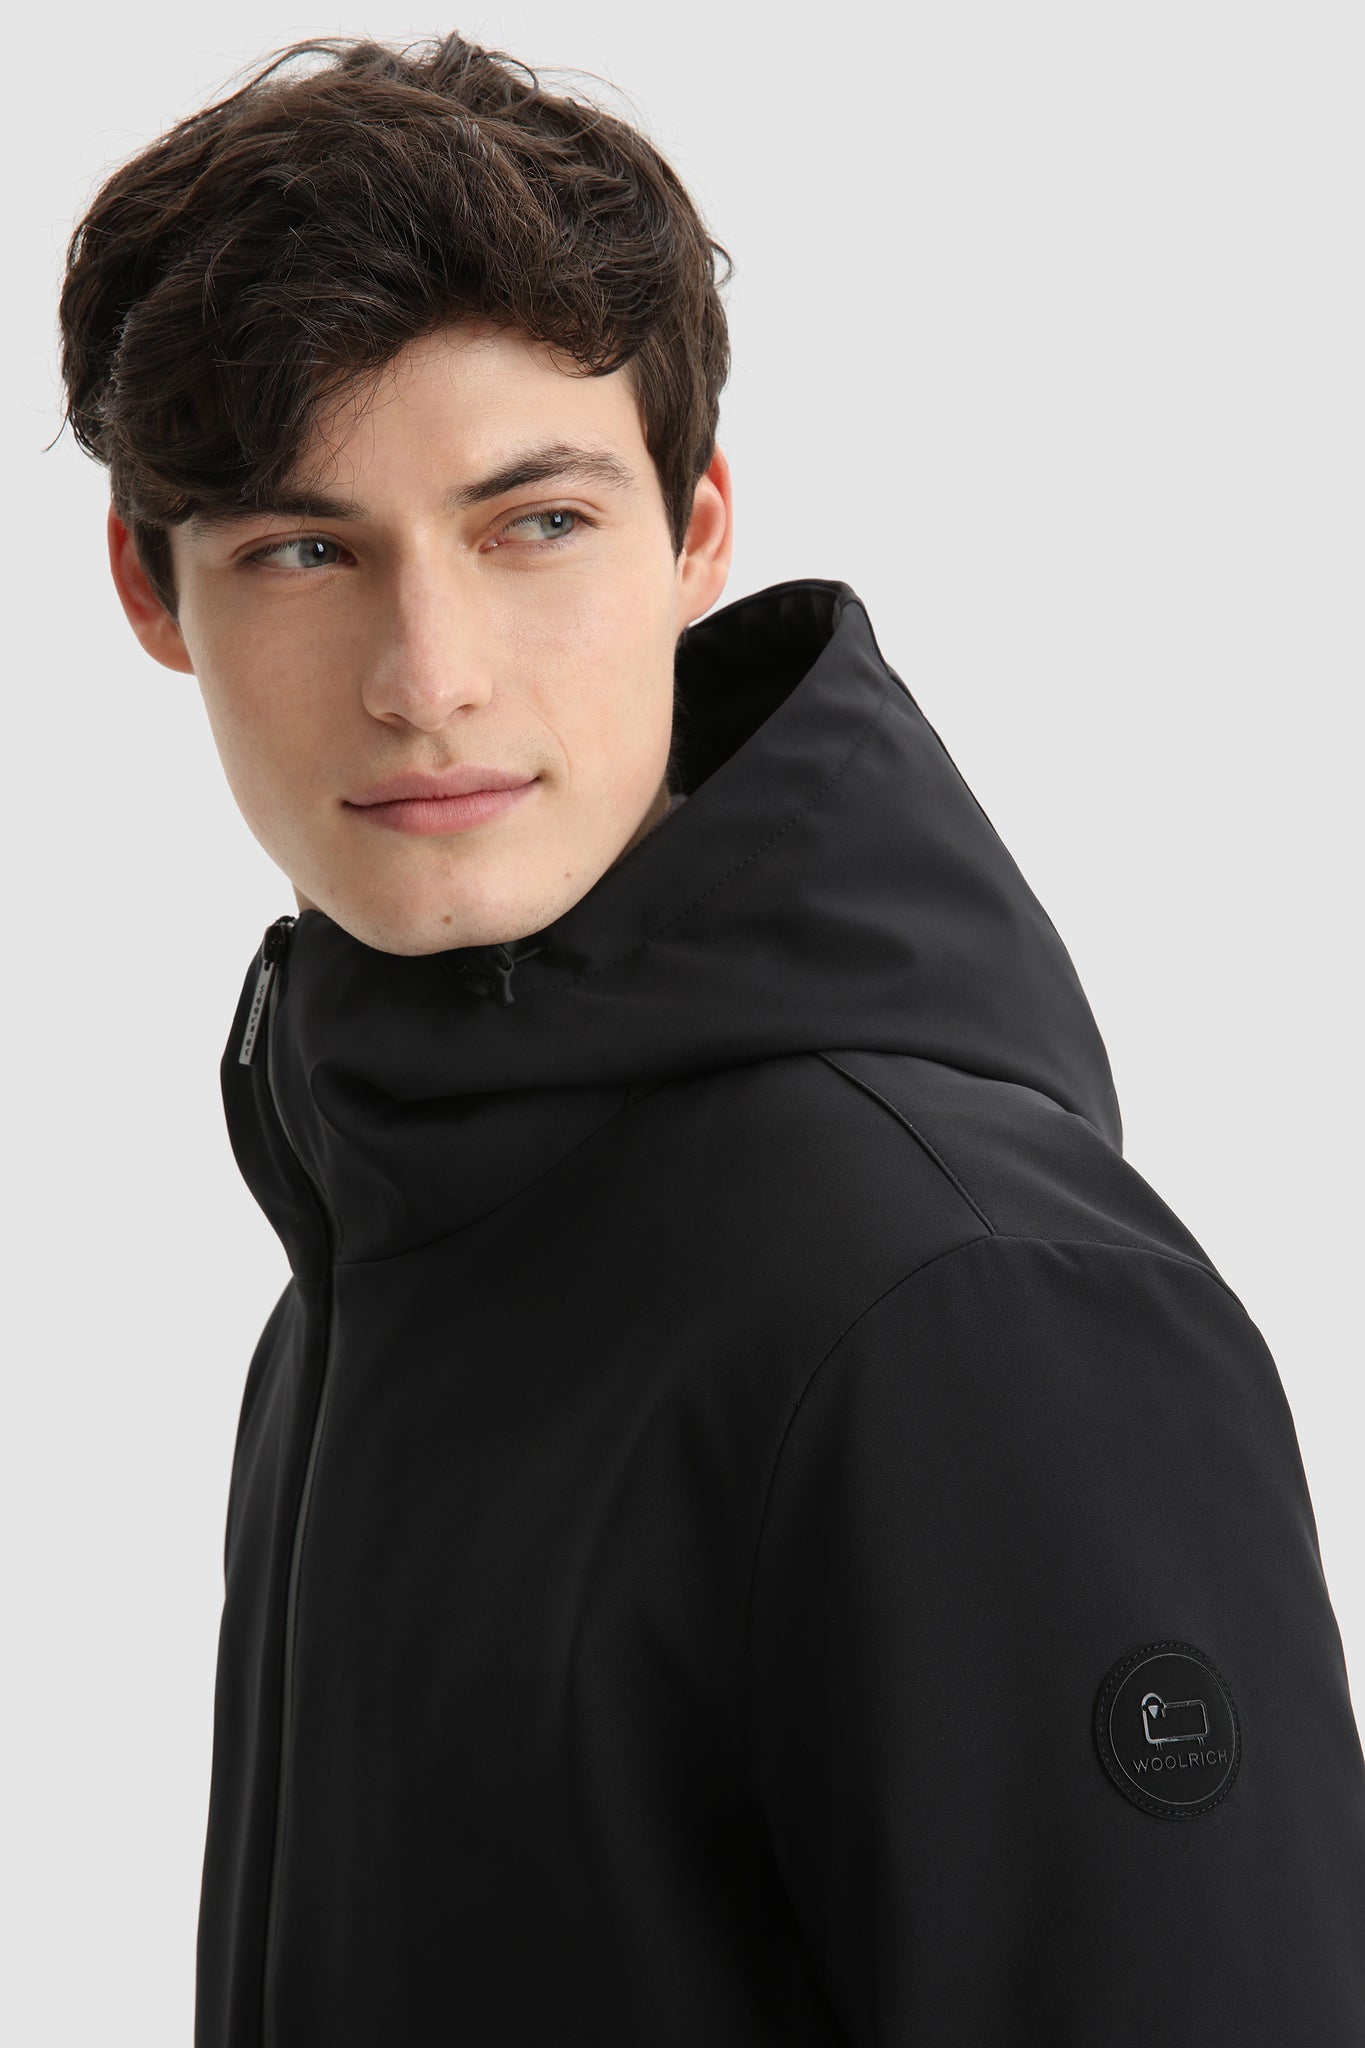 Giacca Woolrich in soft shell / Nero - Ideal Moda